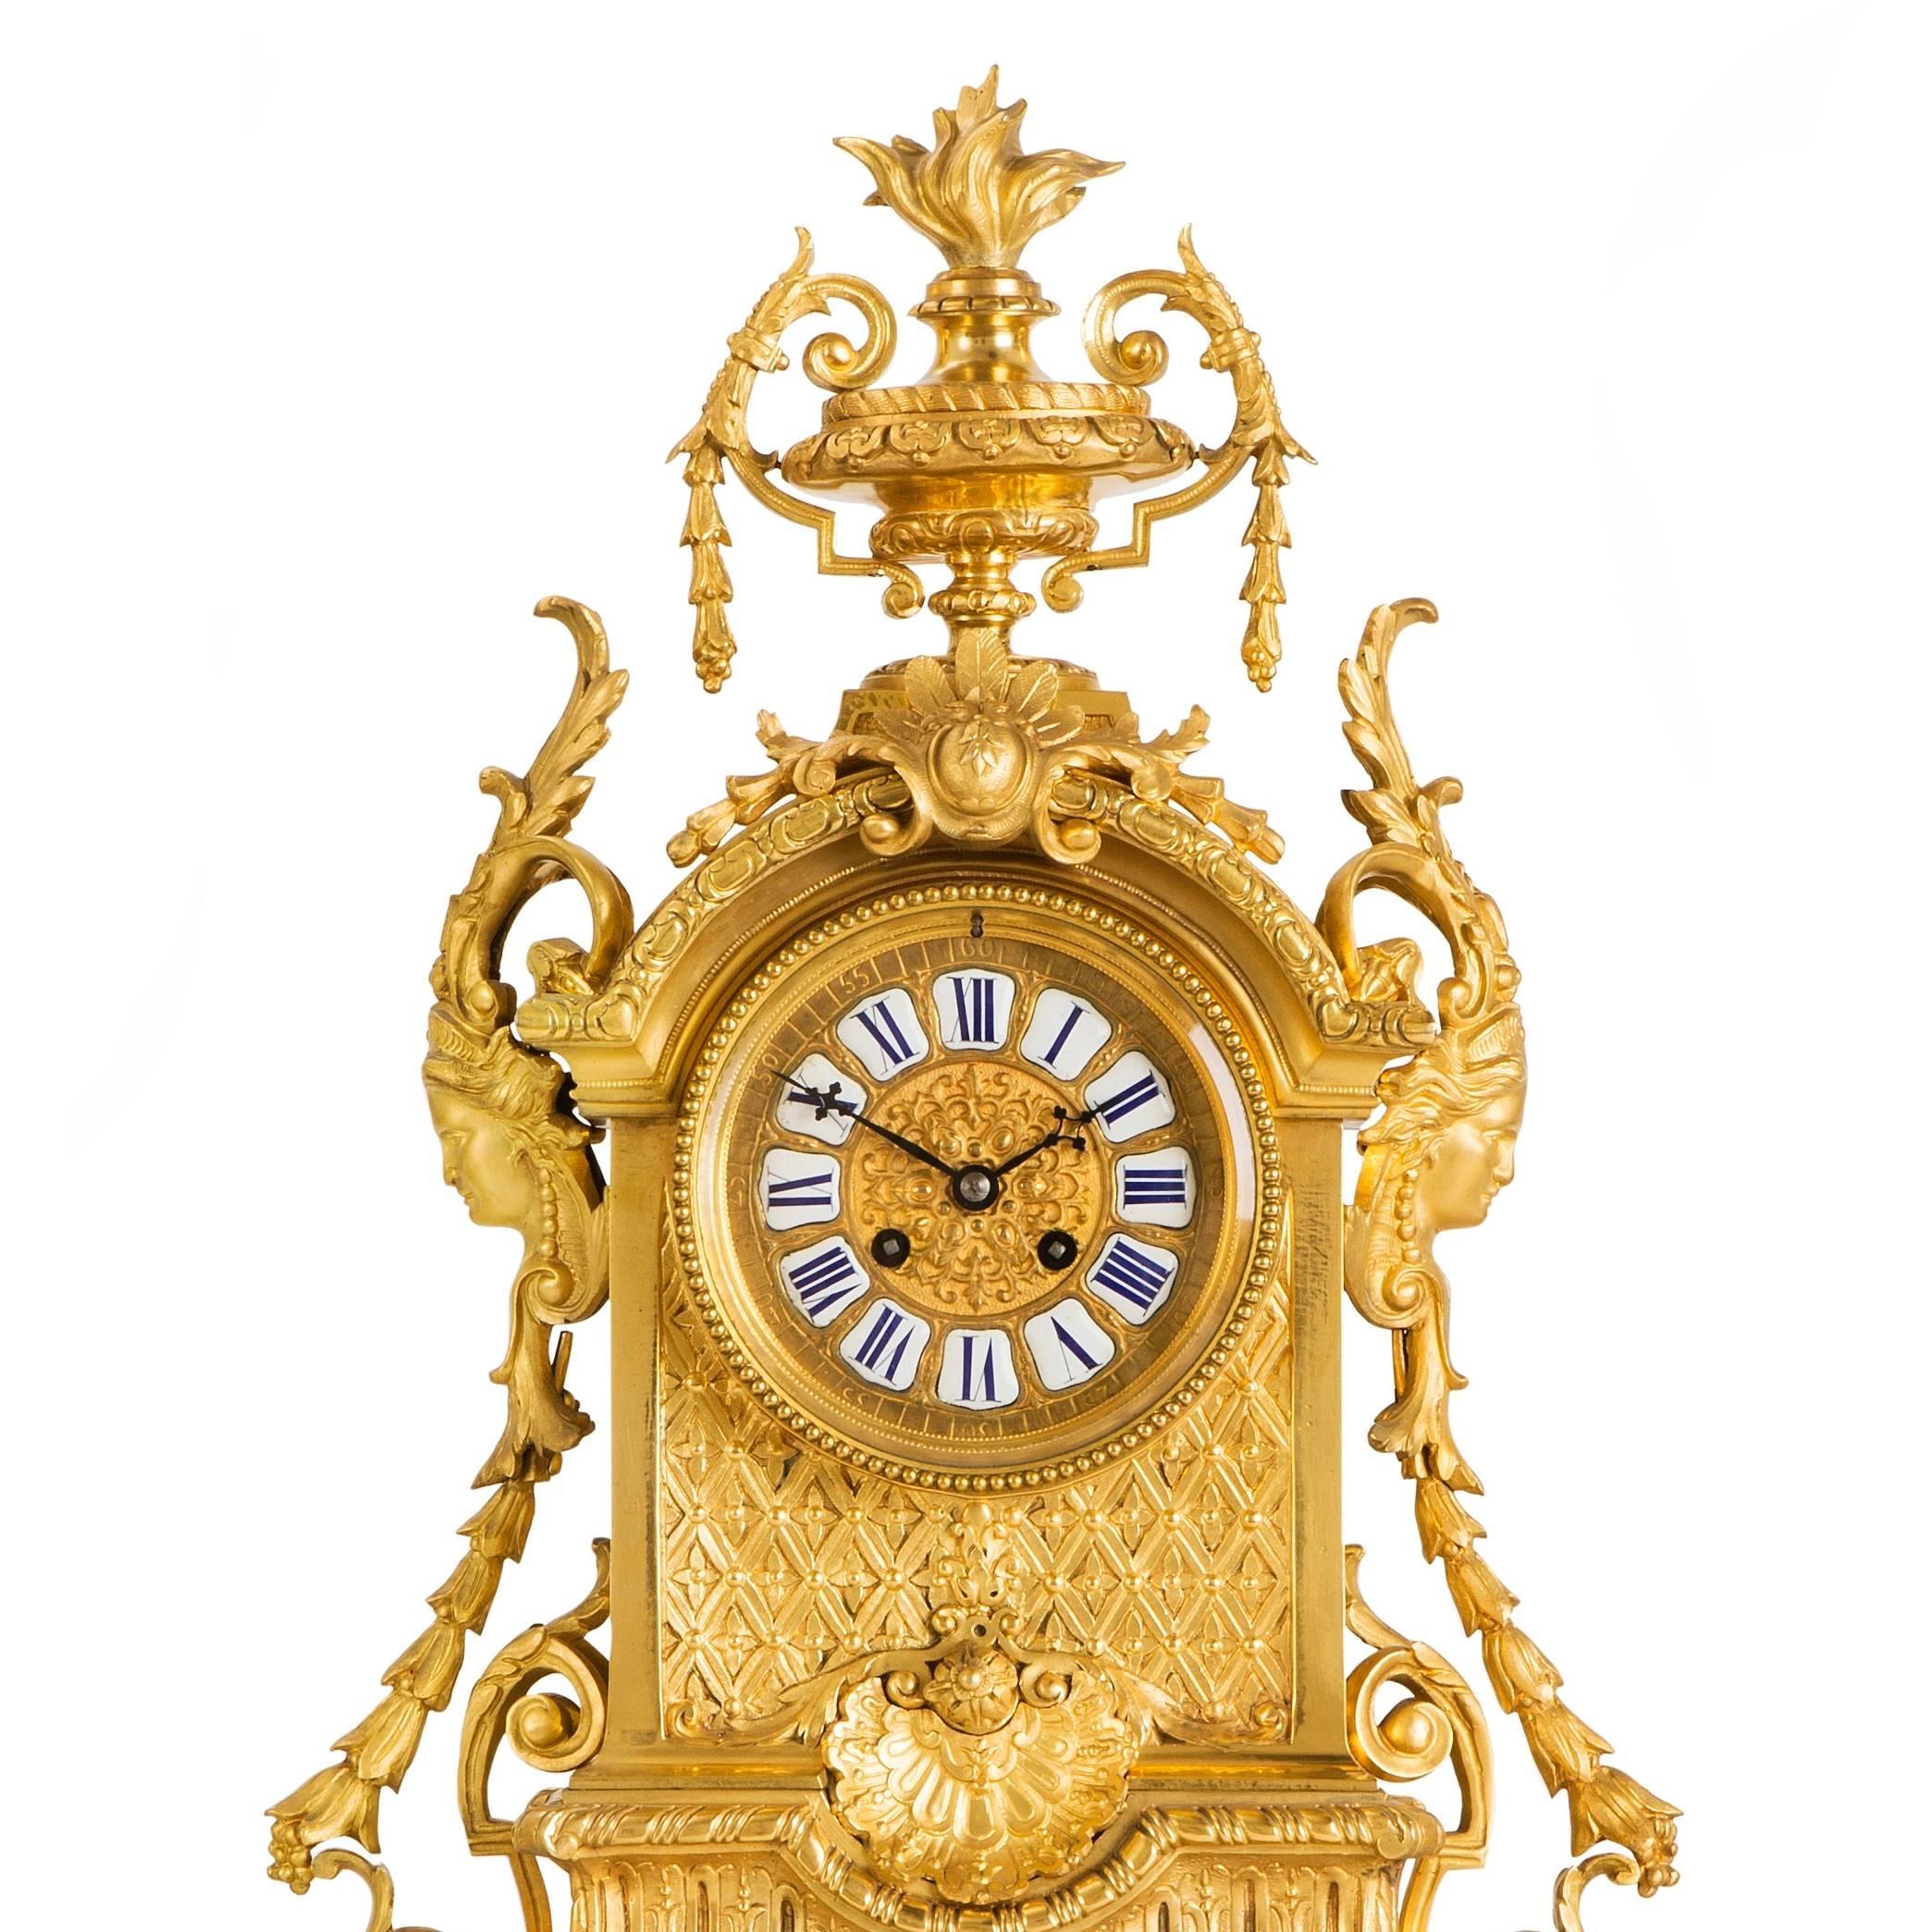 The central clock with dial to the center, displaying hours in individual plaques in Roman numerals and five minute intervals engraved into the ormolu case in Arabic numerals, the case extensively detailed with flowers and foliage, and featuring two